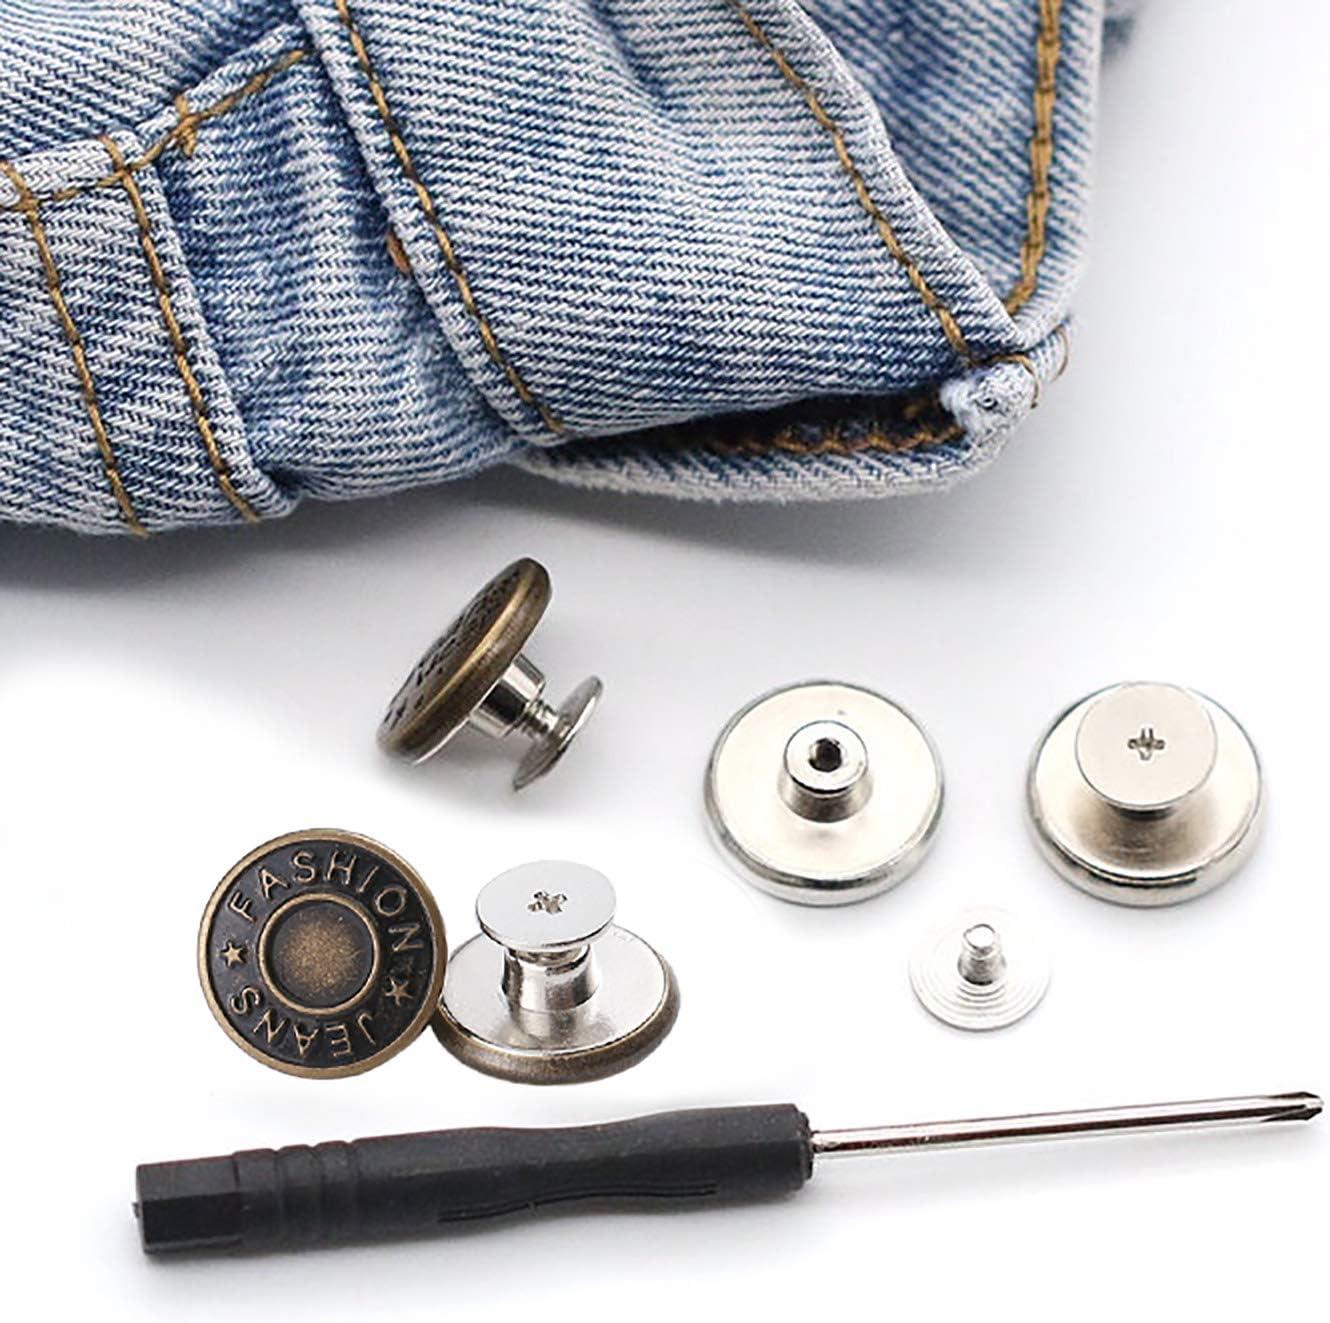 20pcs Button for Jeans, 20mm No Sewing Metal Jean Denim